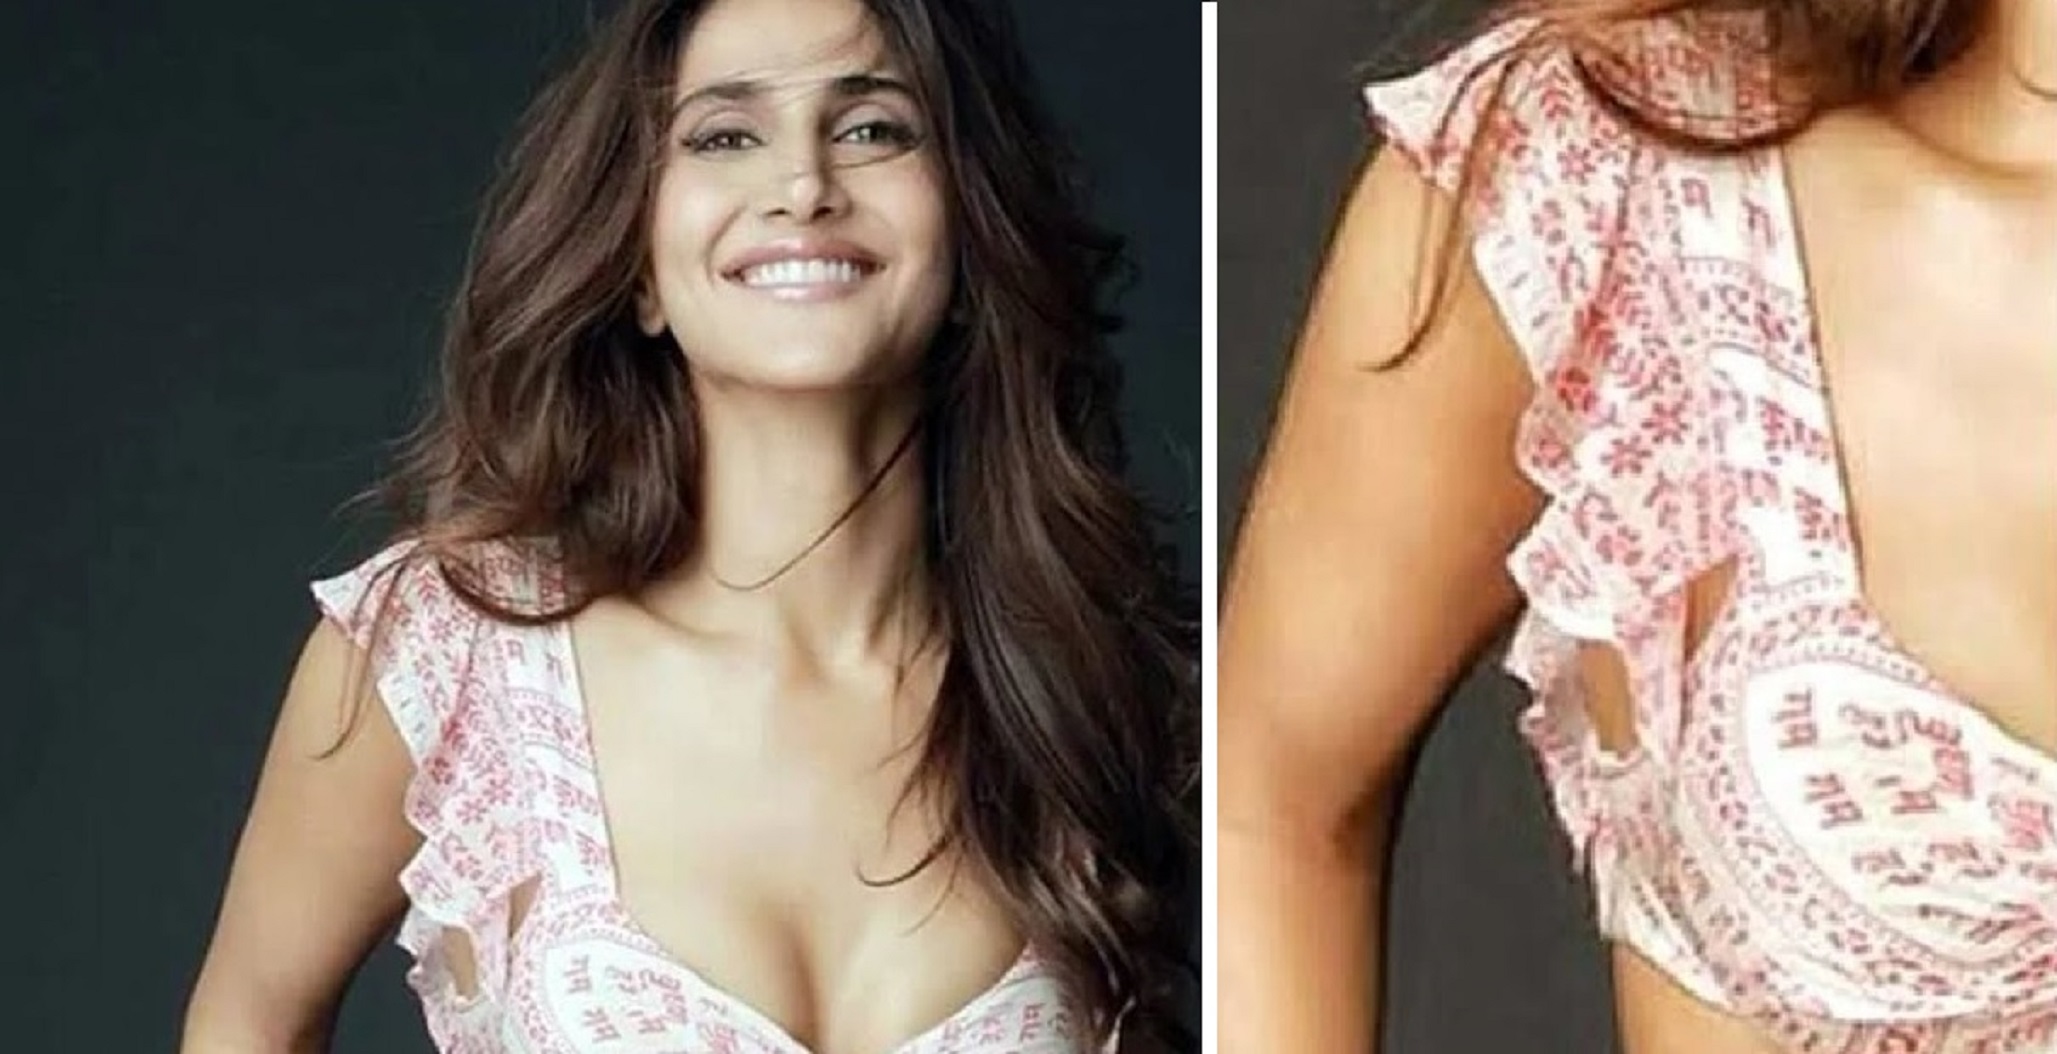 Vaani Kapoor Sparks Controversy By Wearing Small Blouse With ‘Ram’ Written All Over It